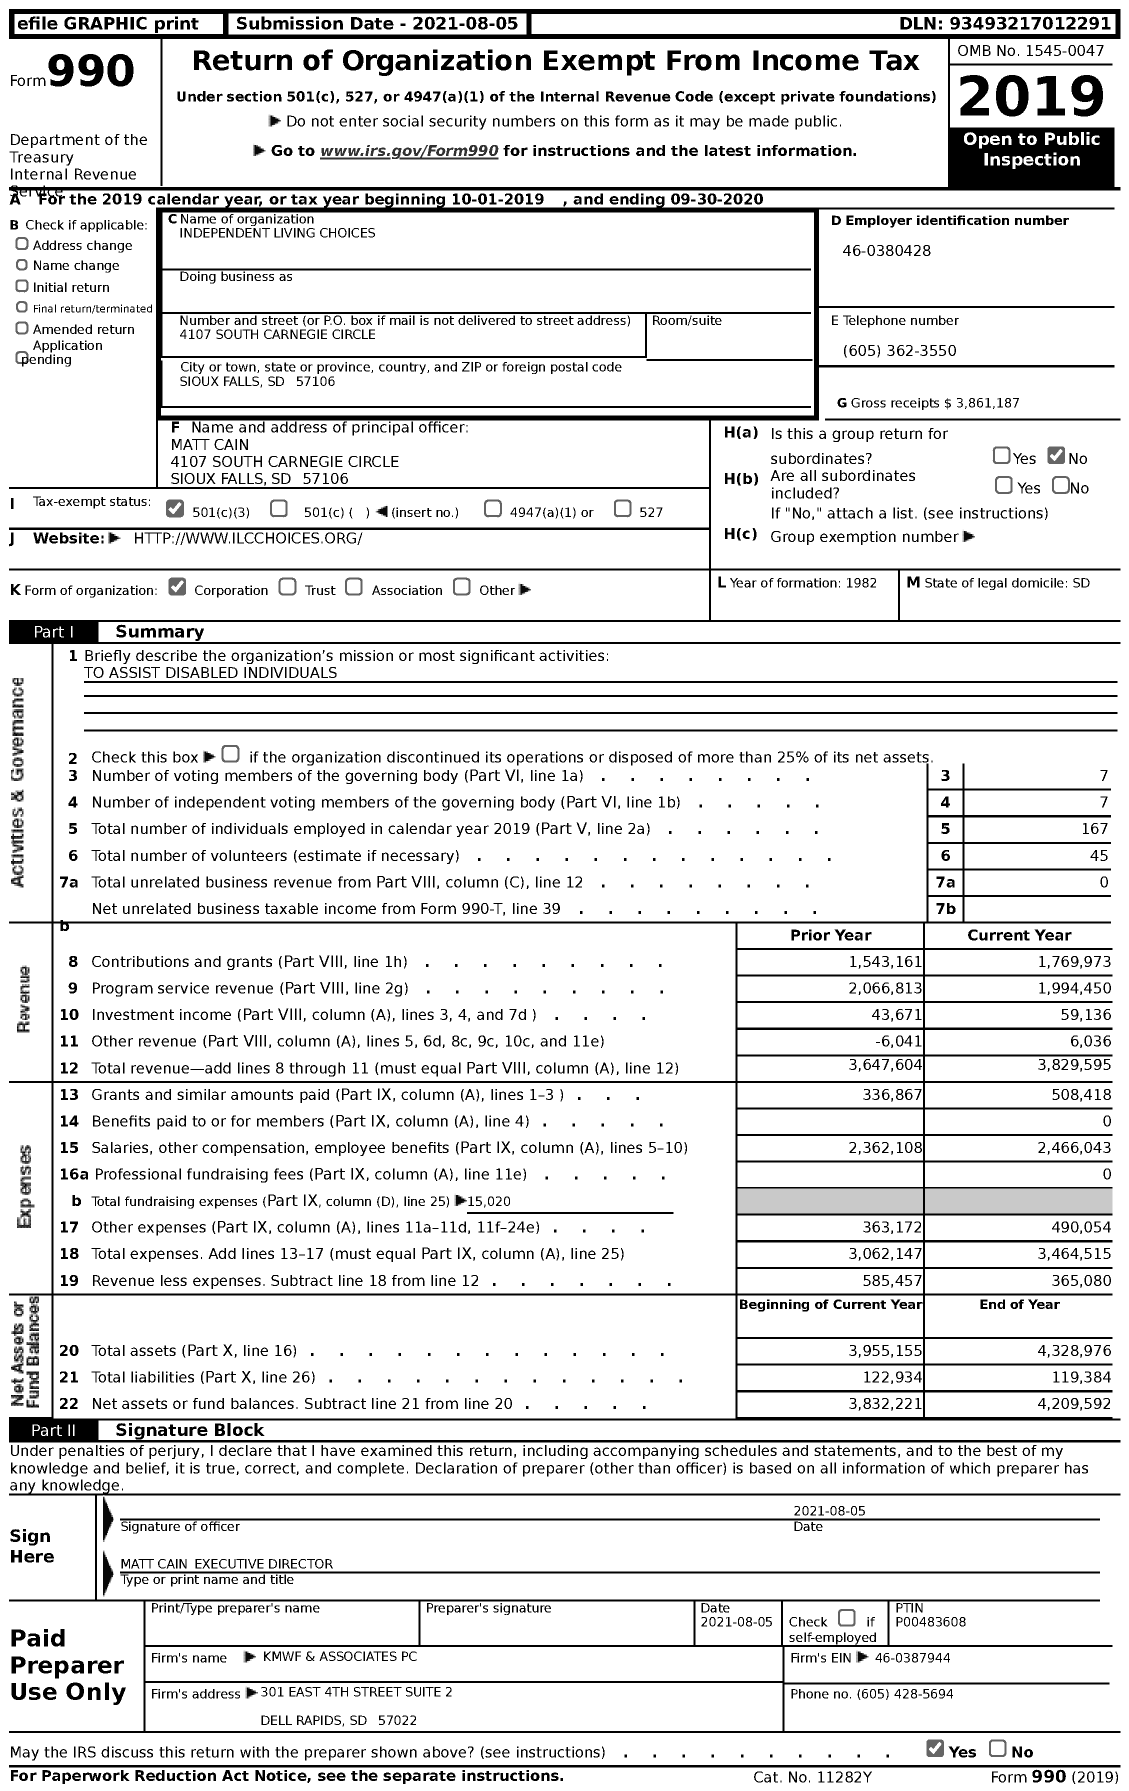 Image of first page of 2019 Form 990 for Independent Living Choices